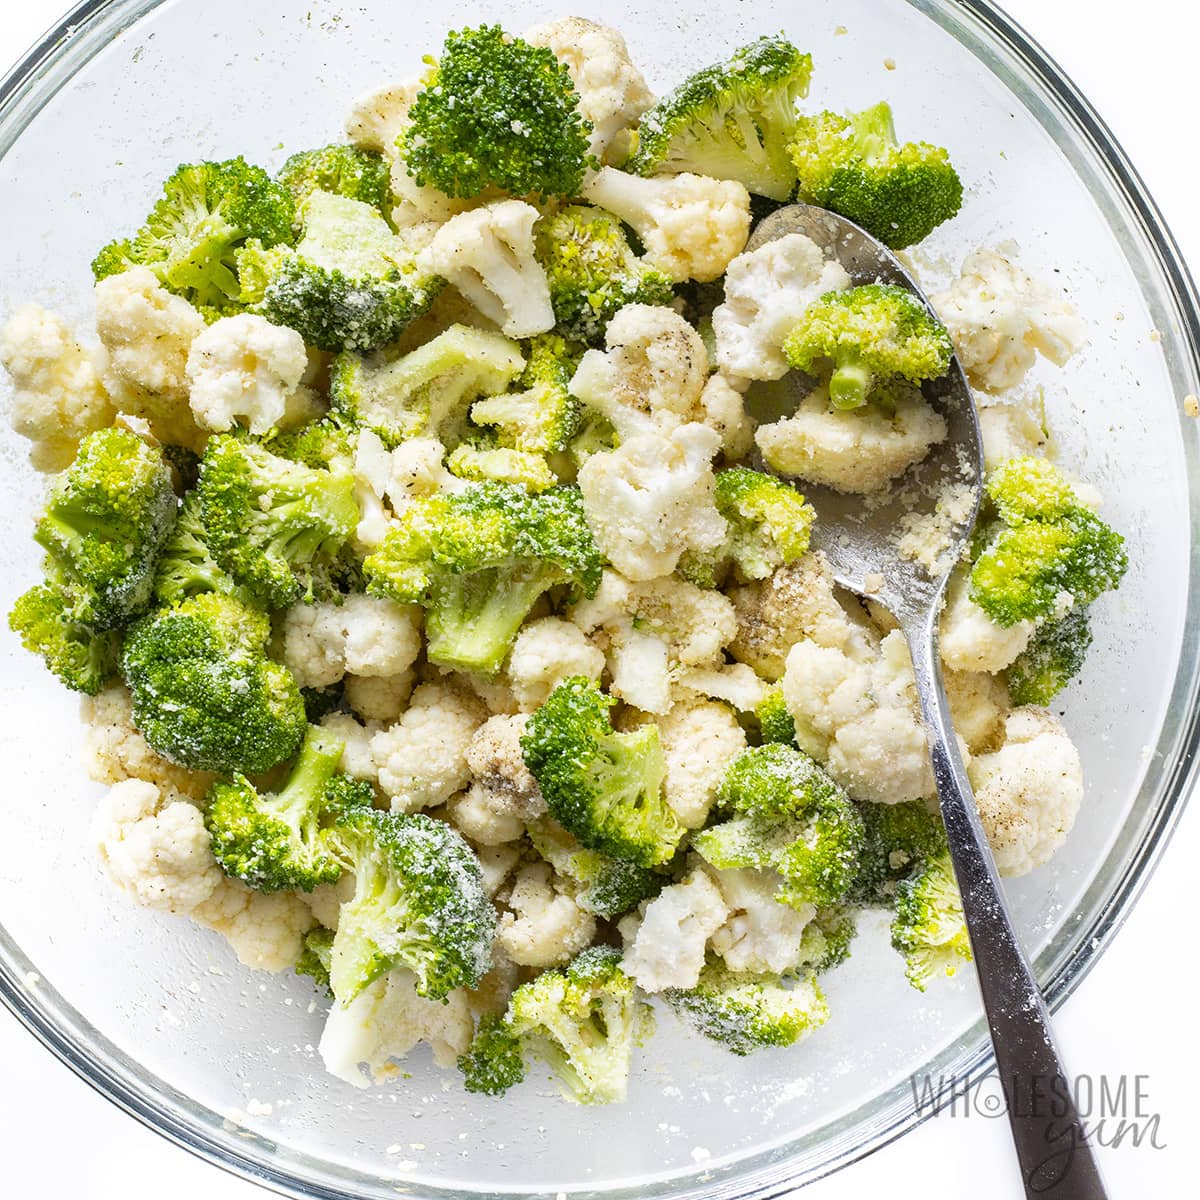 Broccoli and cauliflower in a bowl tossed with olive oil, parmesan, garlic, salt, and pepper.